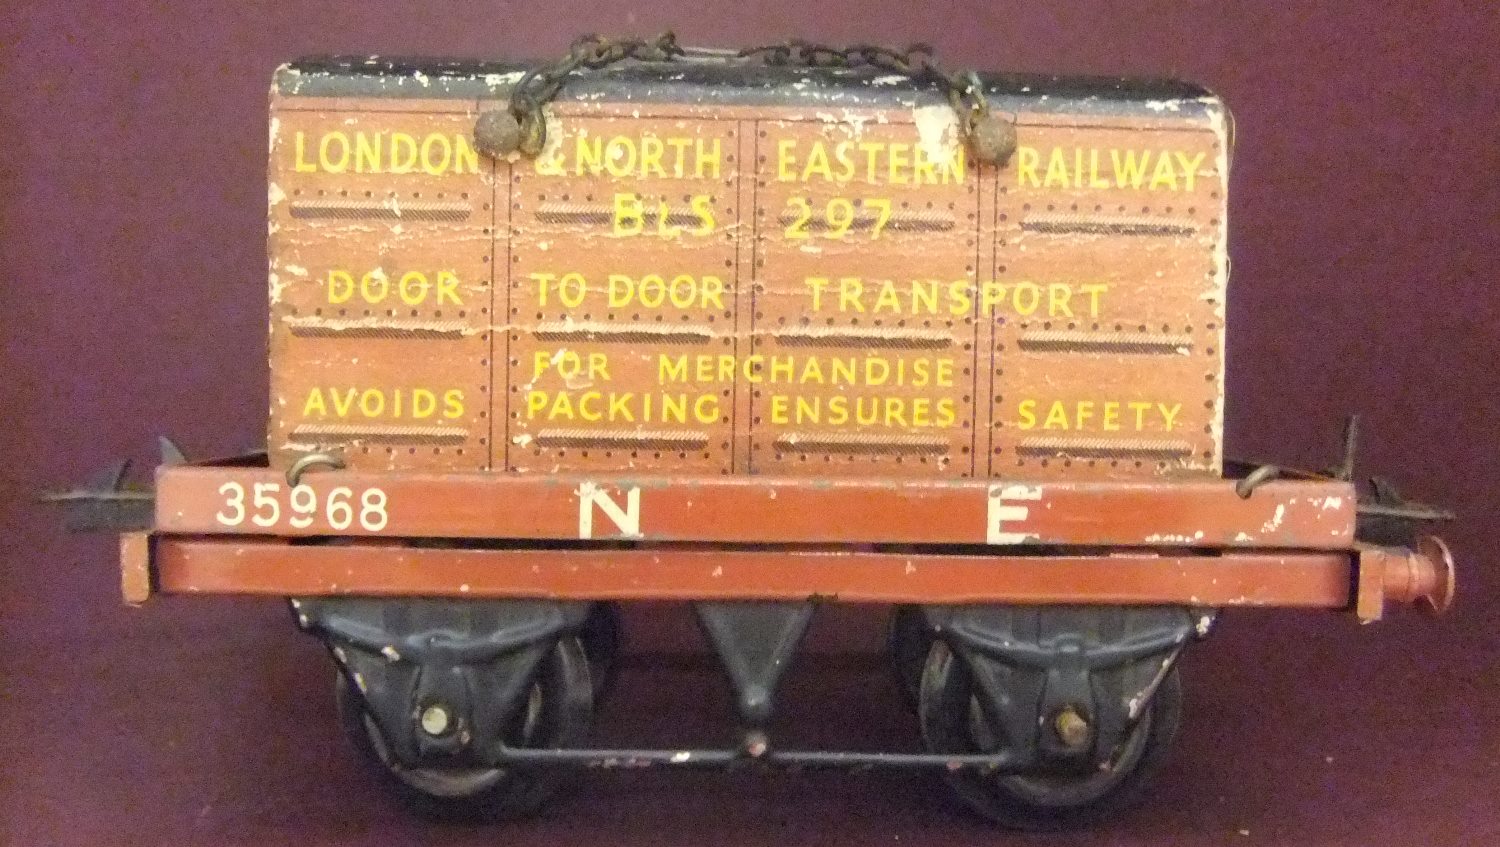 Hornby 0-scale NE container wagon with container